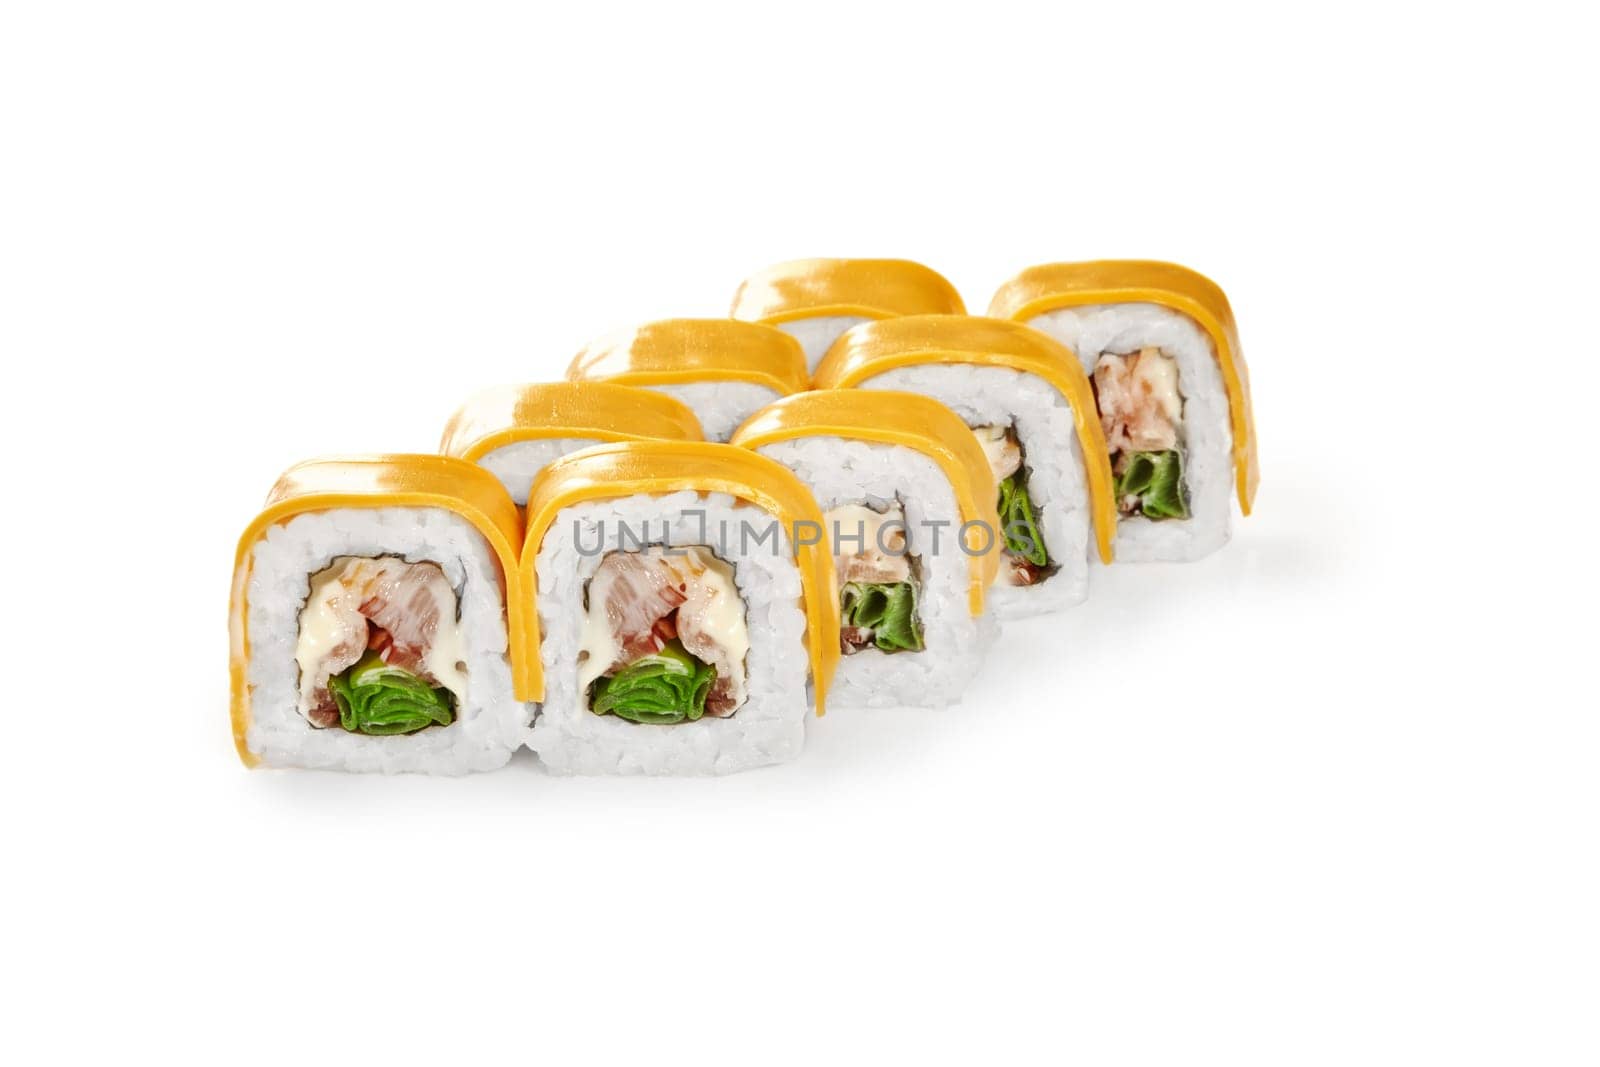 Delicious sushi rolls with eel, scallions and cream cheese wrapped in thin slices of yellow cheddar, presented isolated on white background. Traditional Japanese cuisine